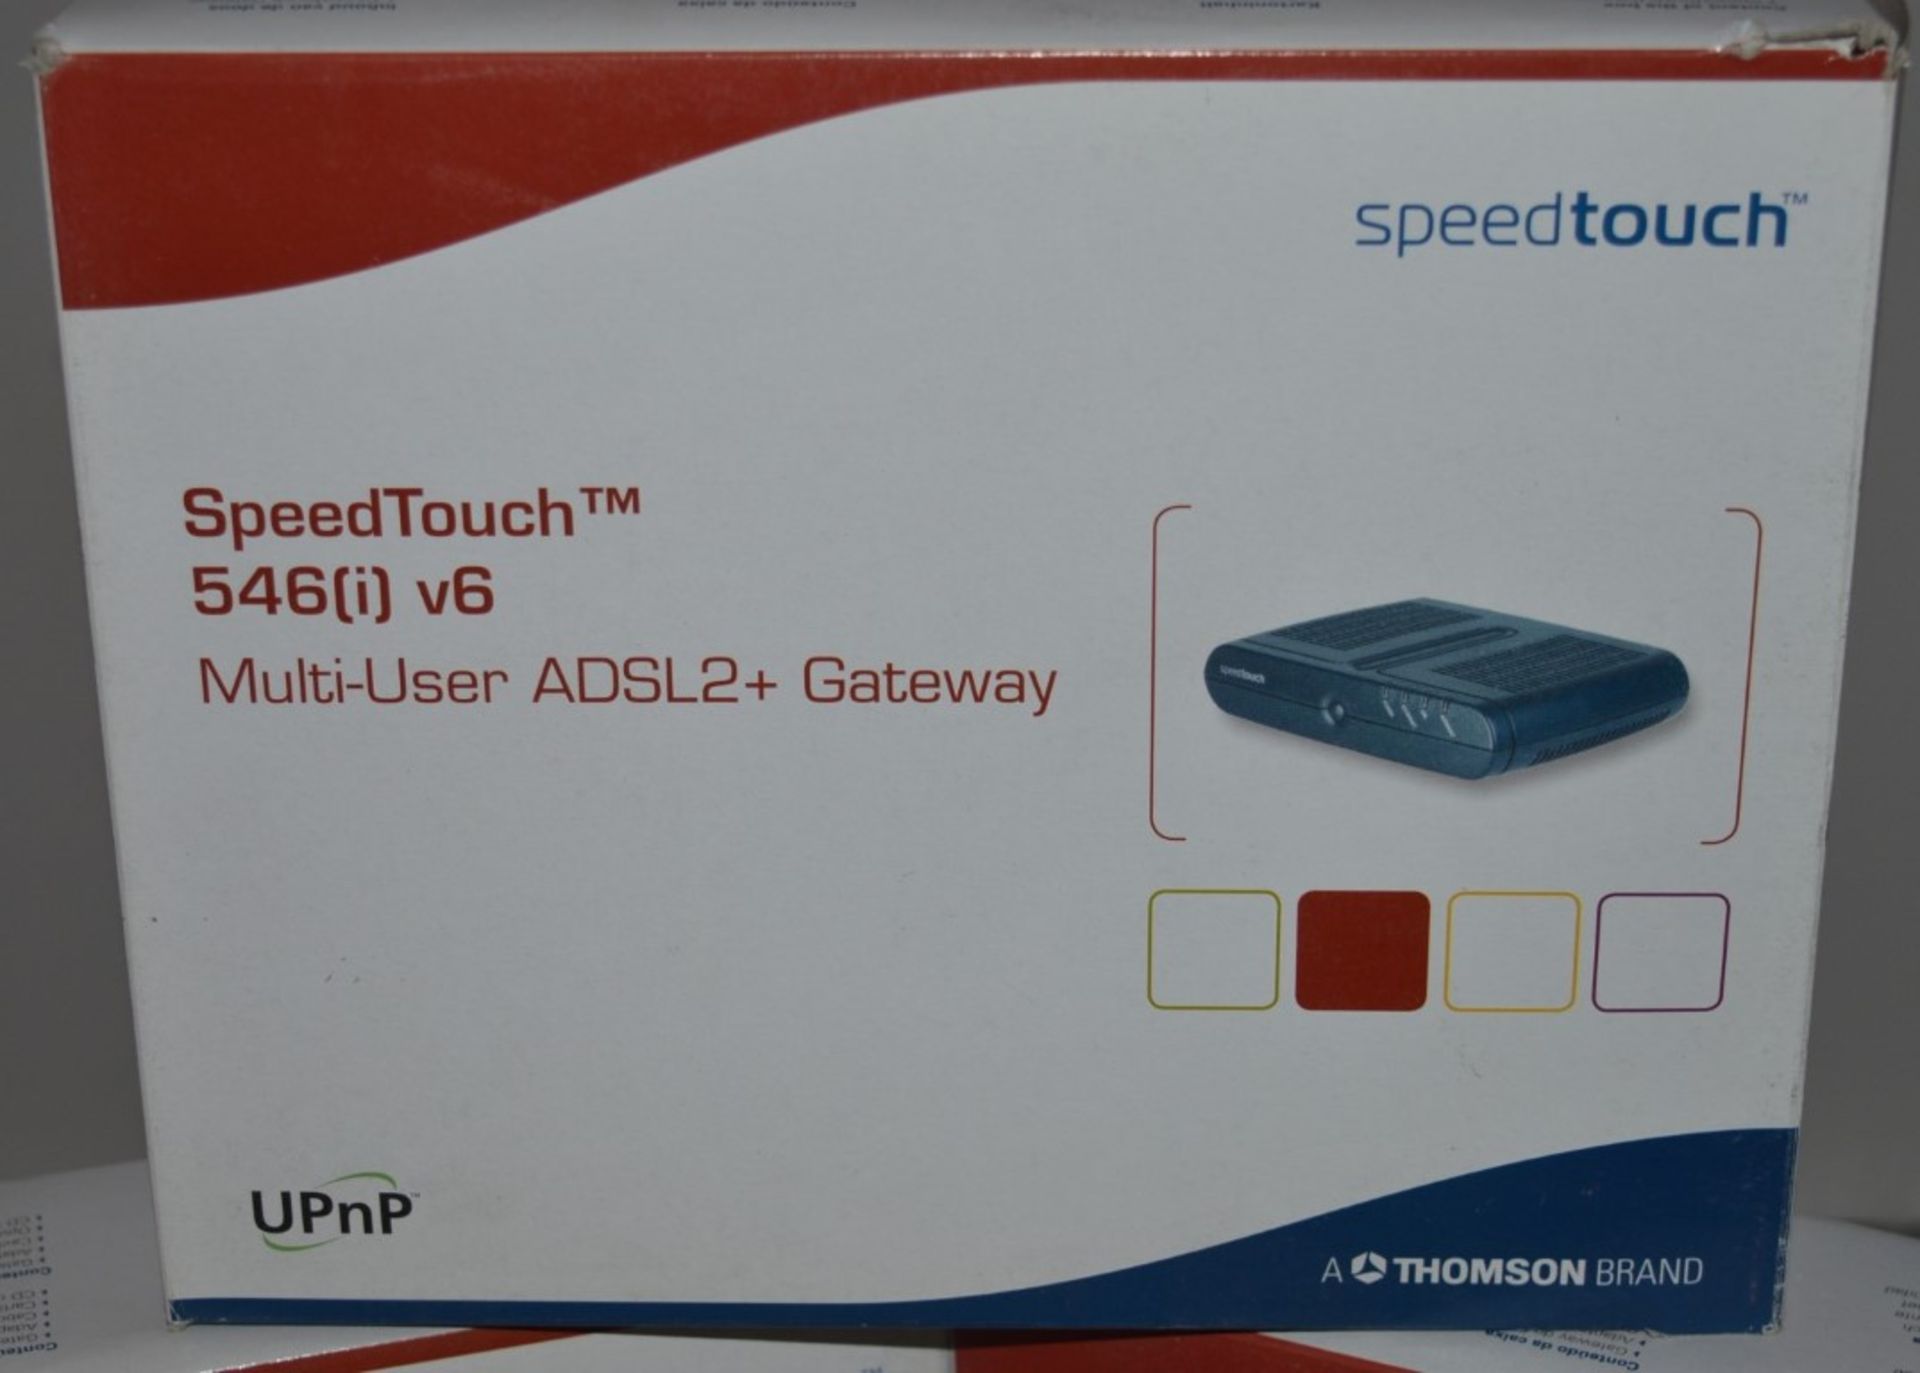 6 x Thompson Speedtouch 546i v6 Multi User ADSL2+ Gateway Routers - New Boxed Stock - CL300 - Ref PC - Image 3 of 3